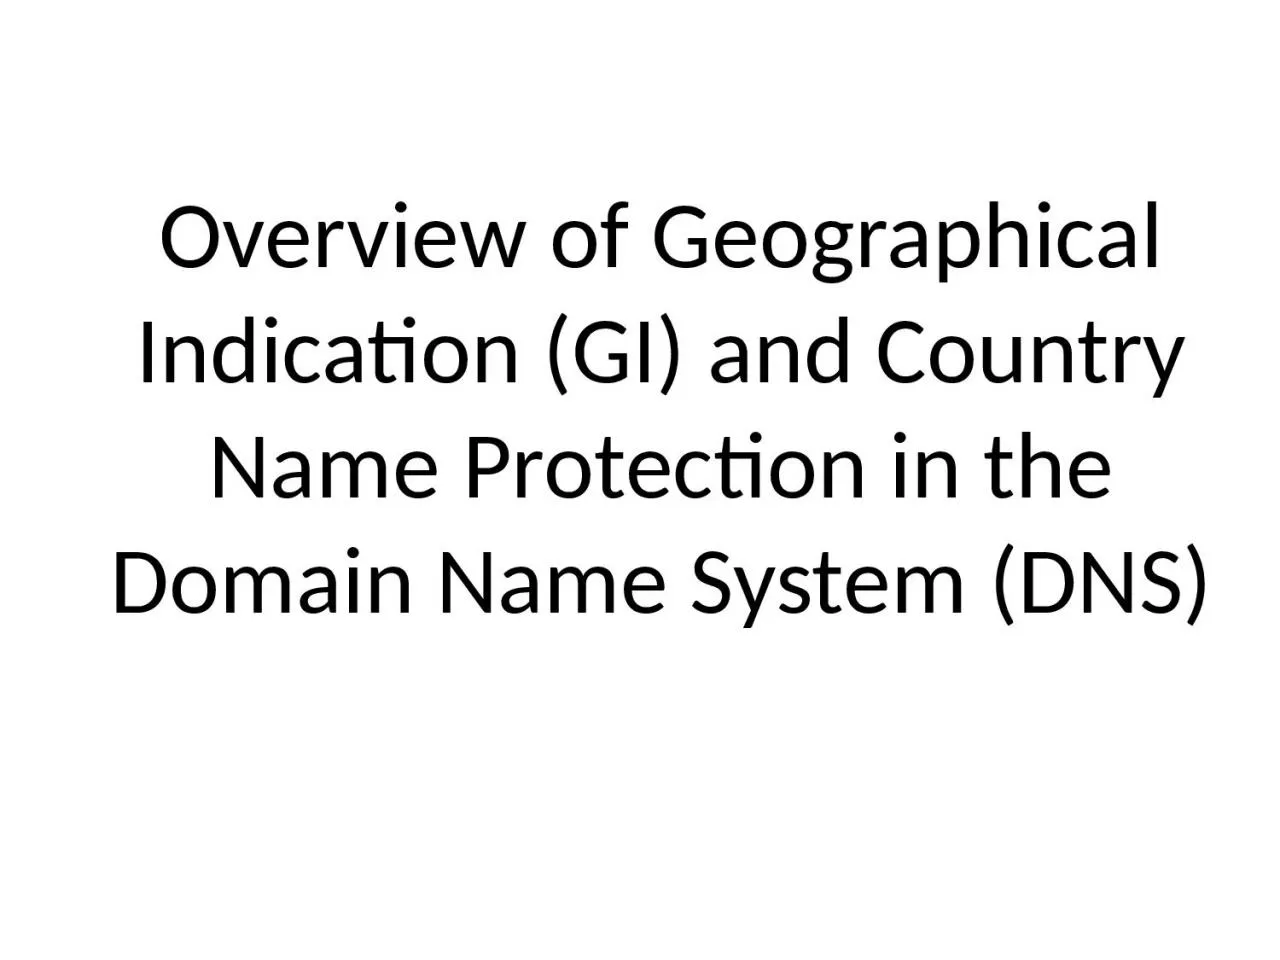 Overview of Geographical Indication (GI) and Country Name Protection in the Domain Name